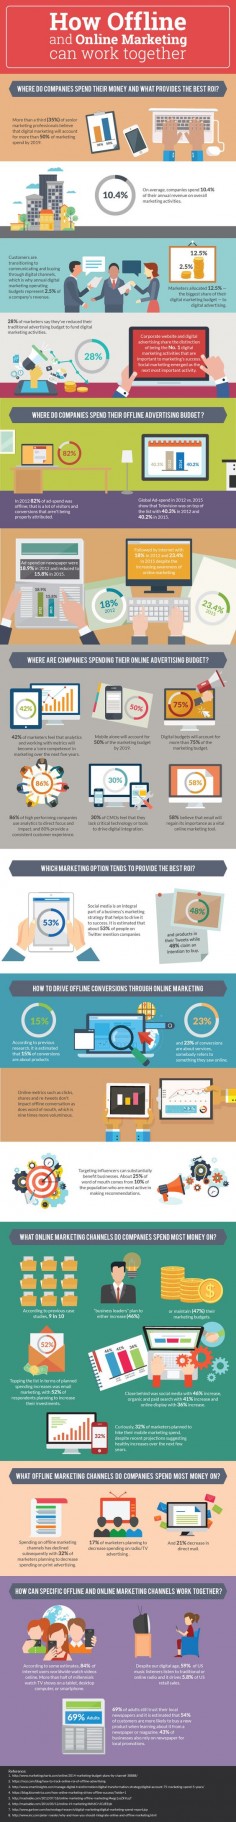 How Offline and Online Marketing Can Work Together [Infographic] | Social Media Today